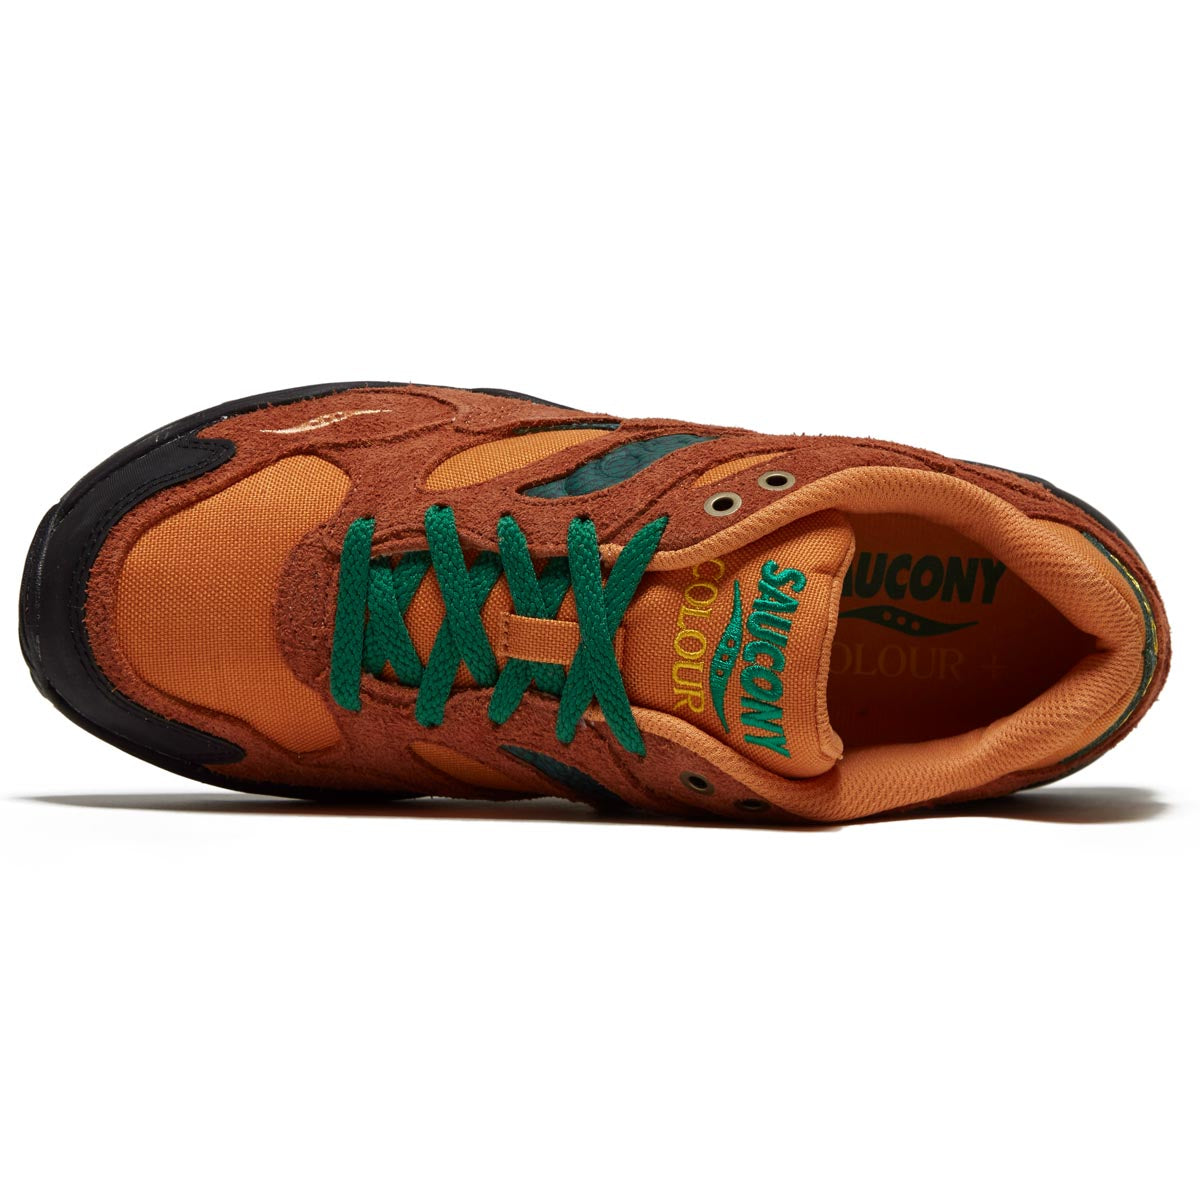 Saucony Grid Shadow 2 Shoes - Forest Wander image 3